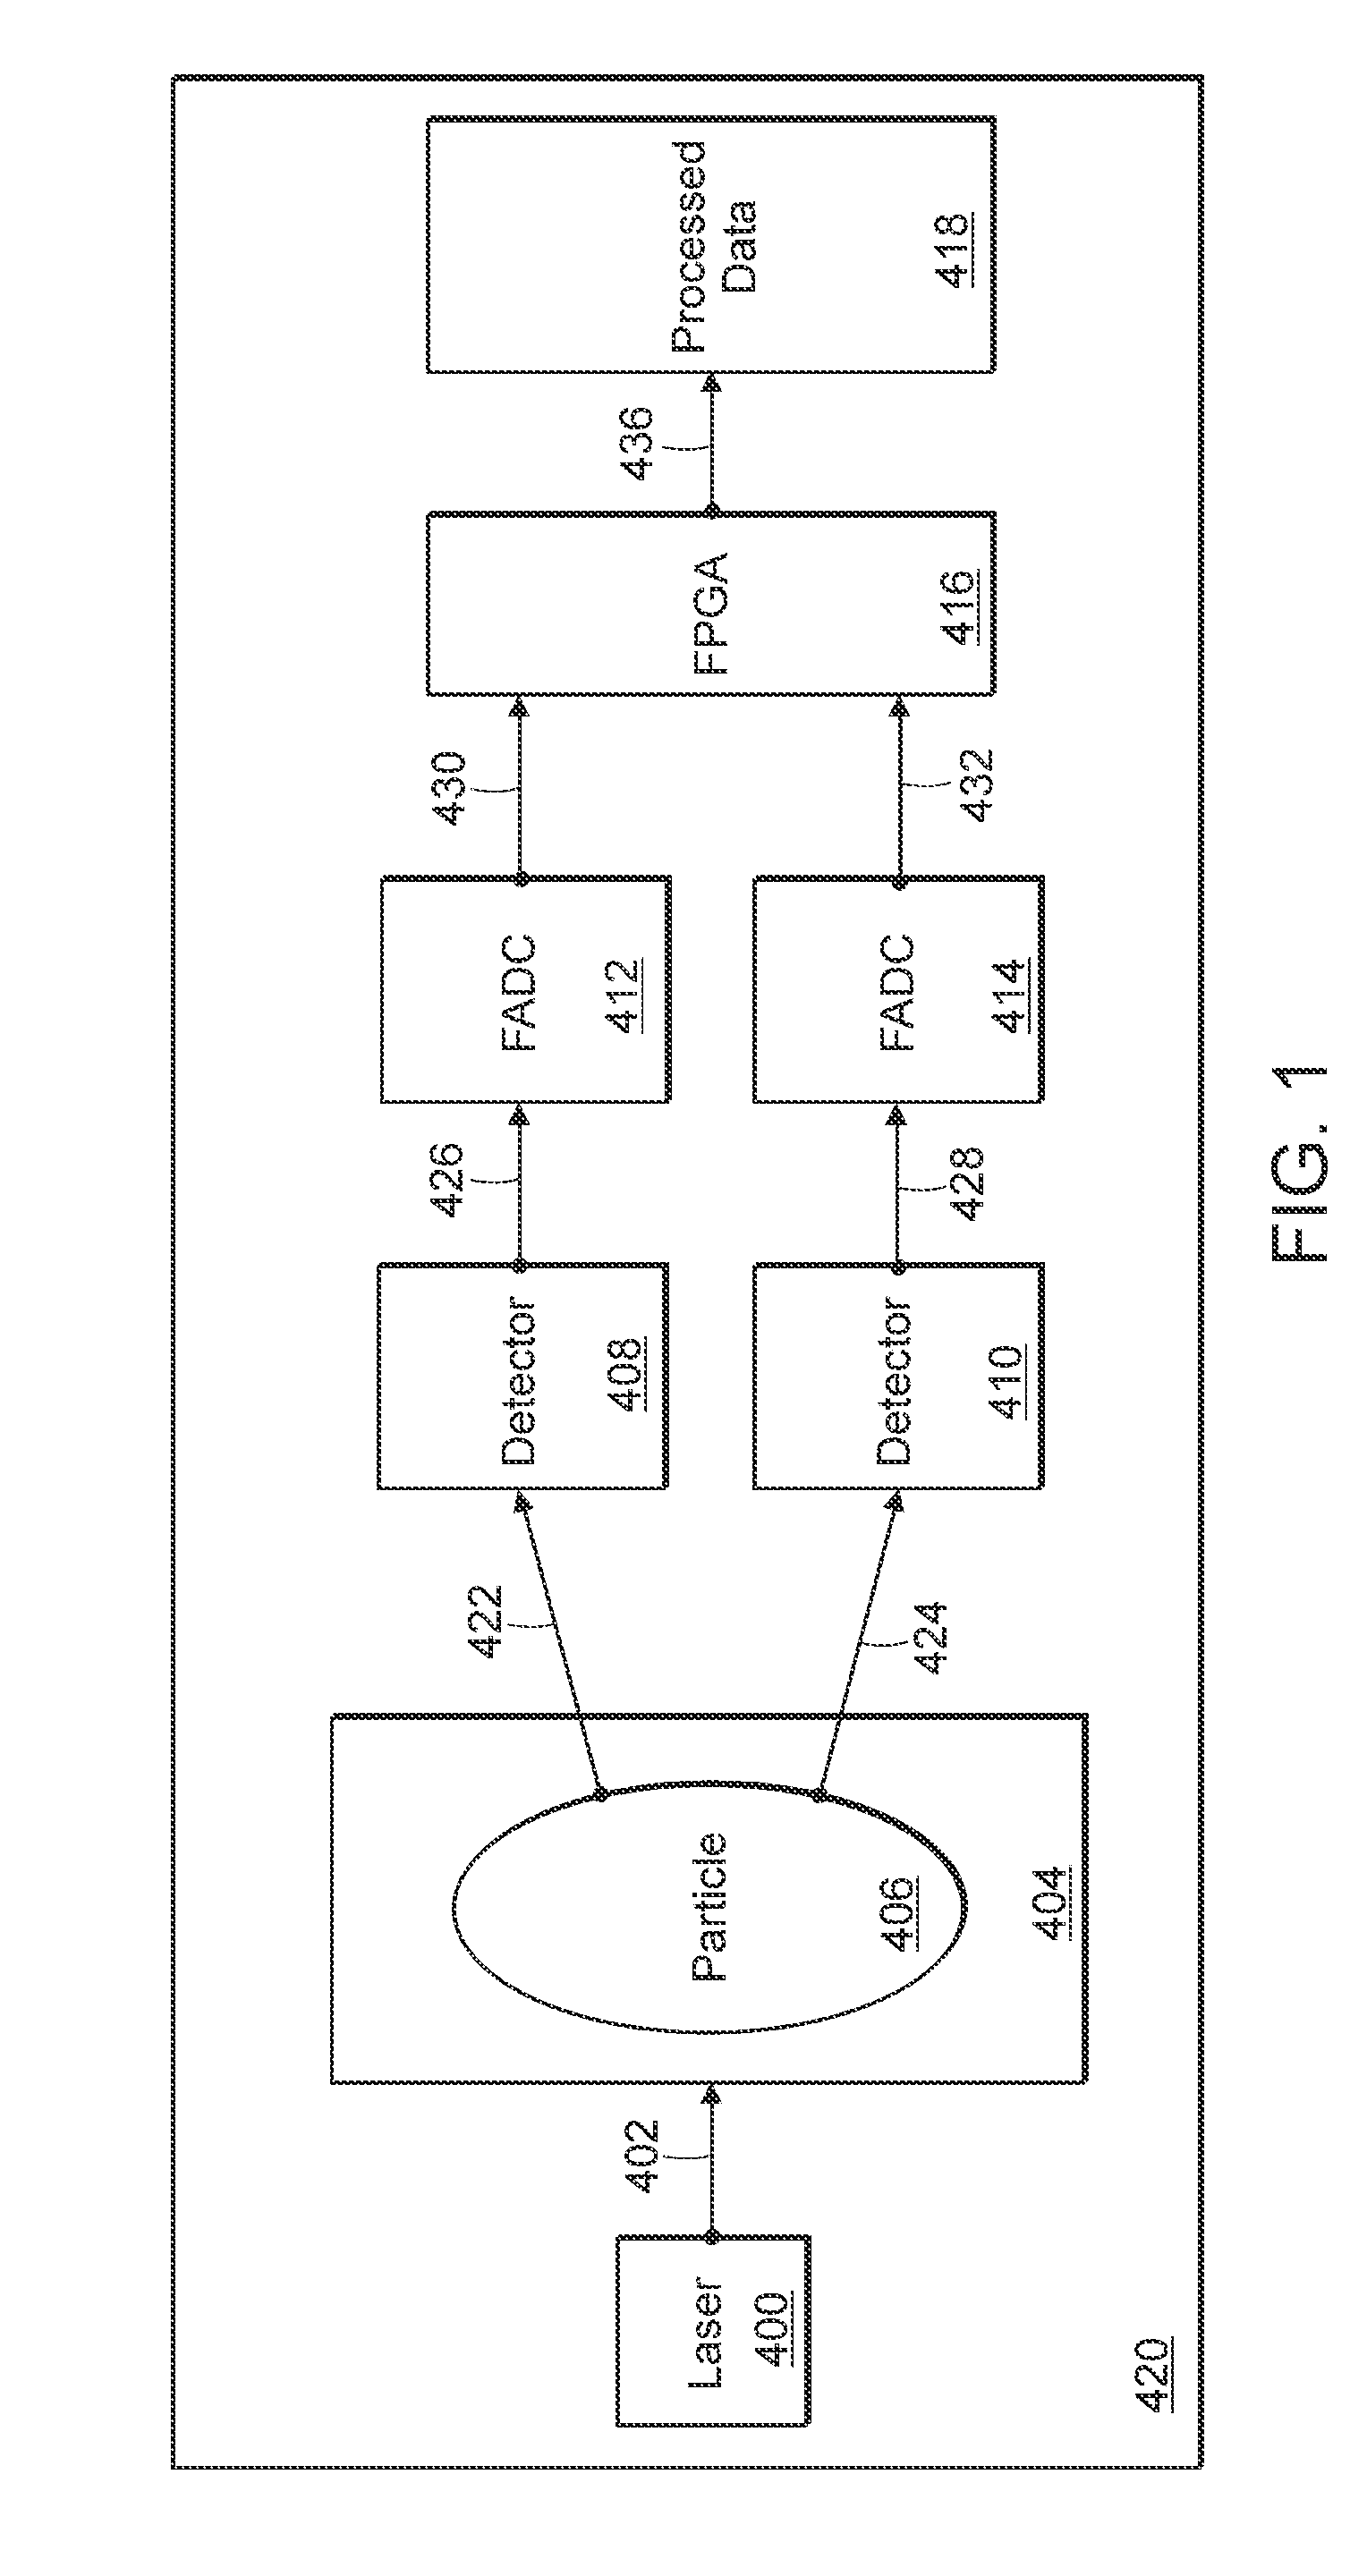 System and method for managing data from a flow analyzer